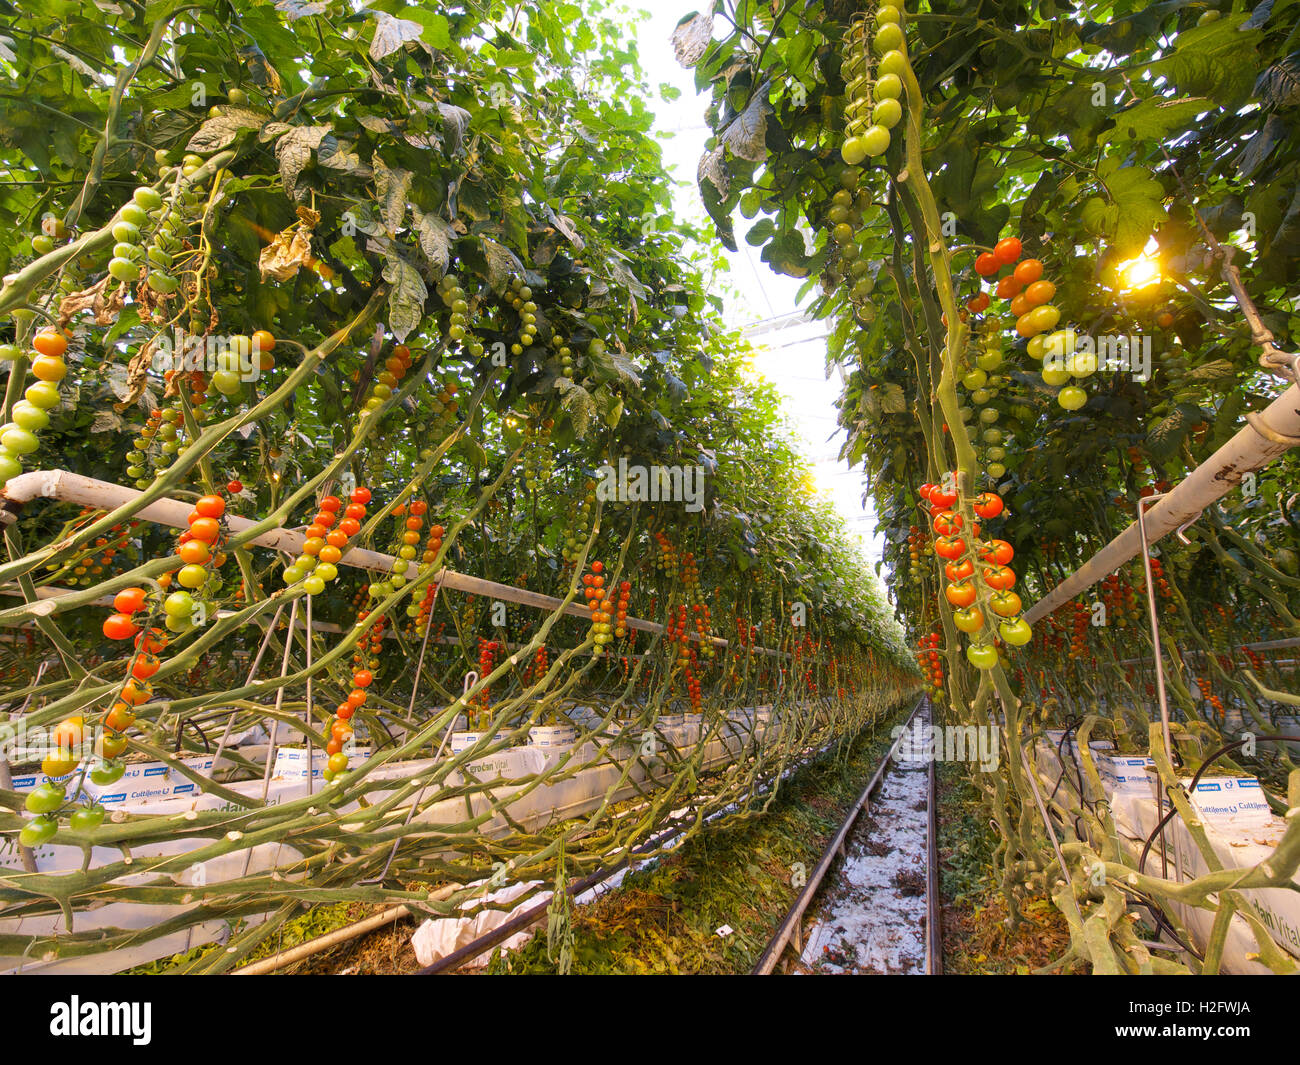 Growing tomatoes in a greenhouse on an industrial scale, Rilland, Zeeland, the Netherlands Stock Photo